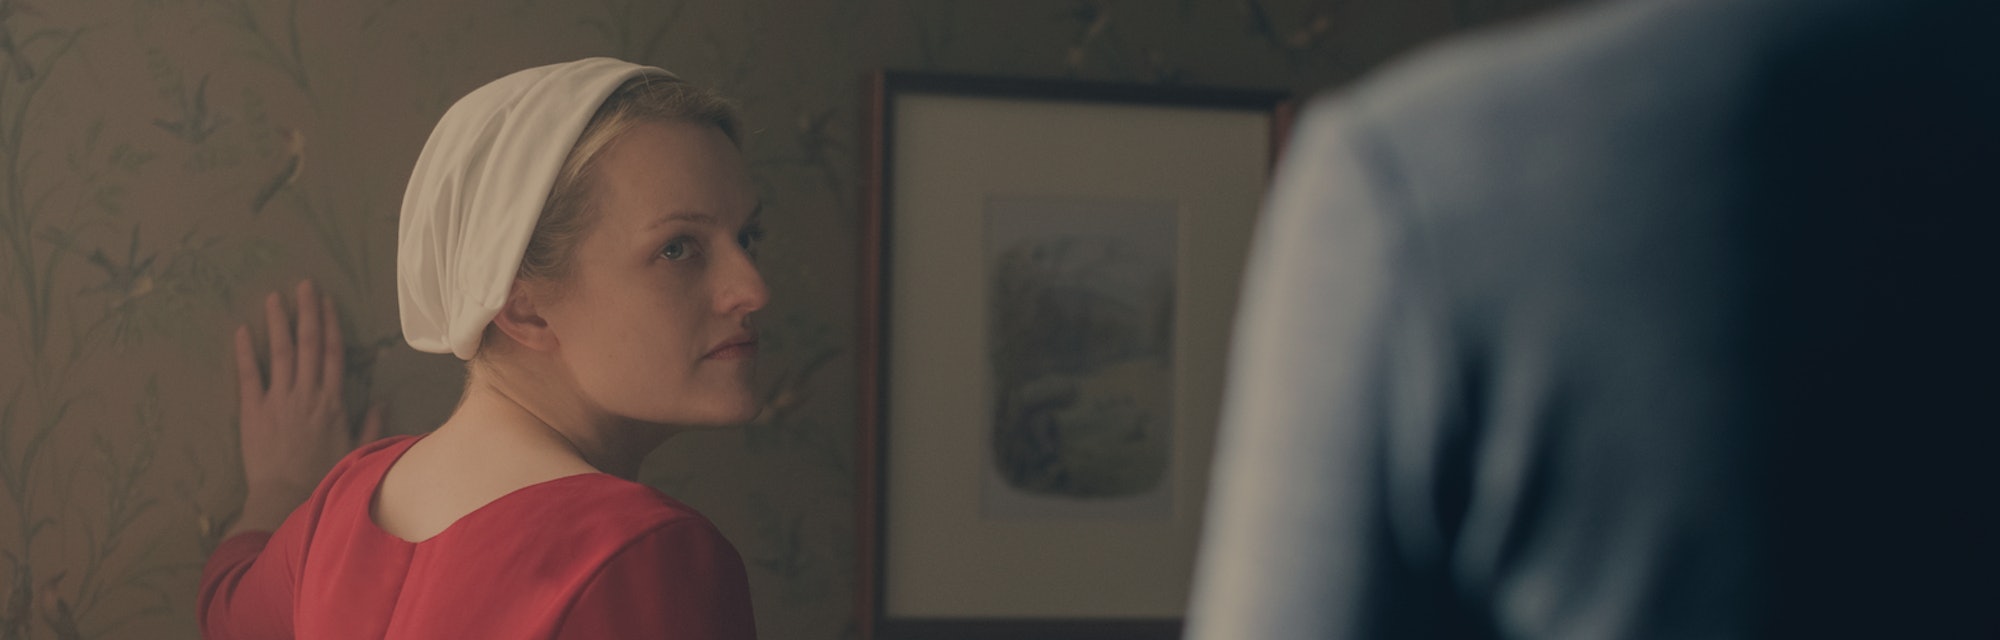 'Handmaid's Tale' Was Getting Unwatchable, But Episode 6